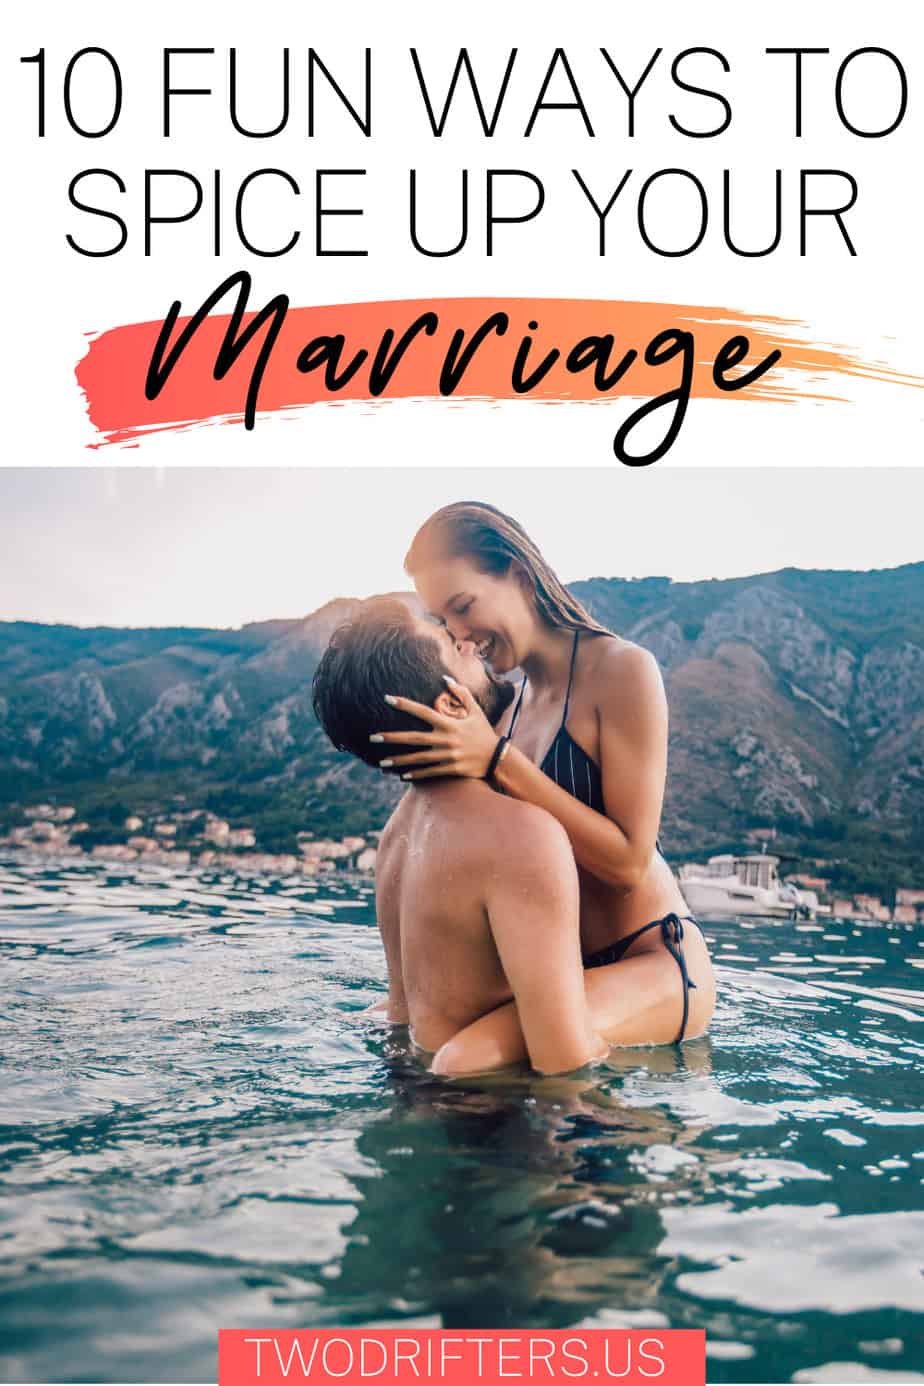 Pinterest social image that says “10 fun ways to spice up your marriage.”